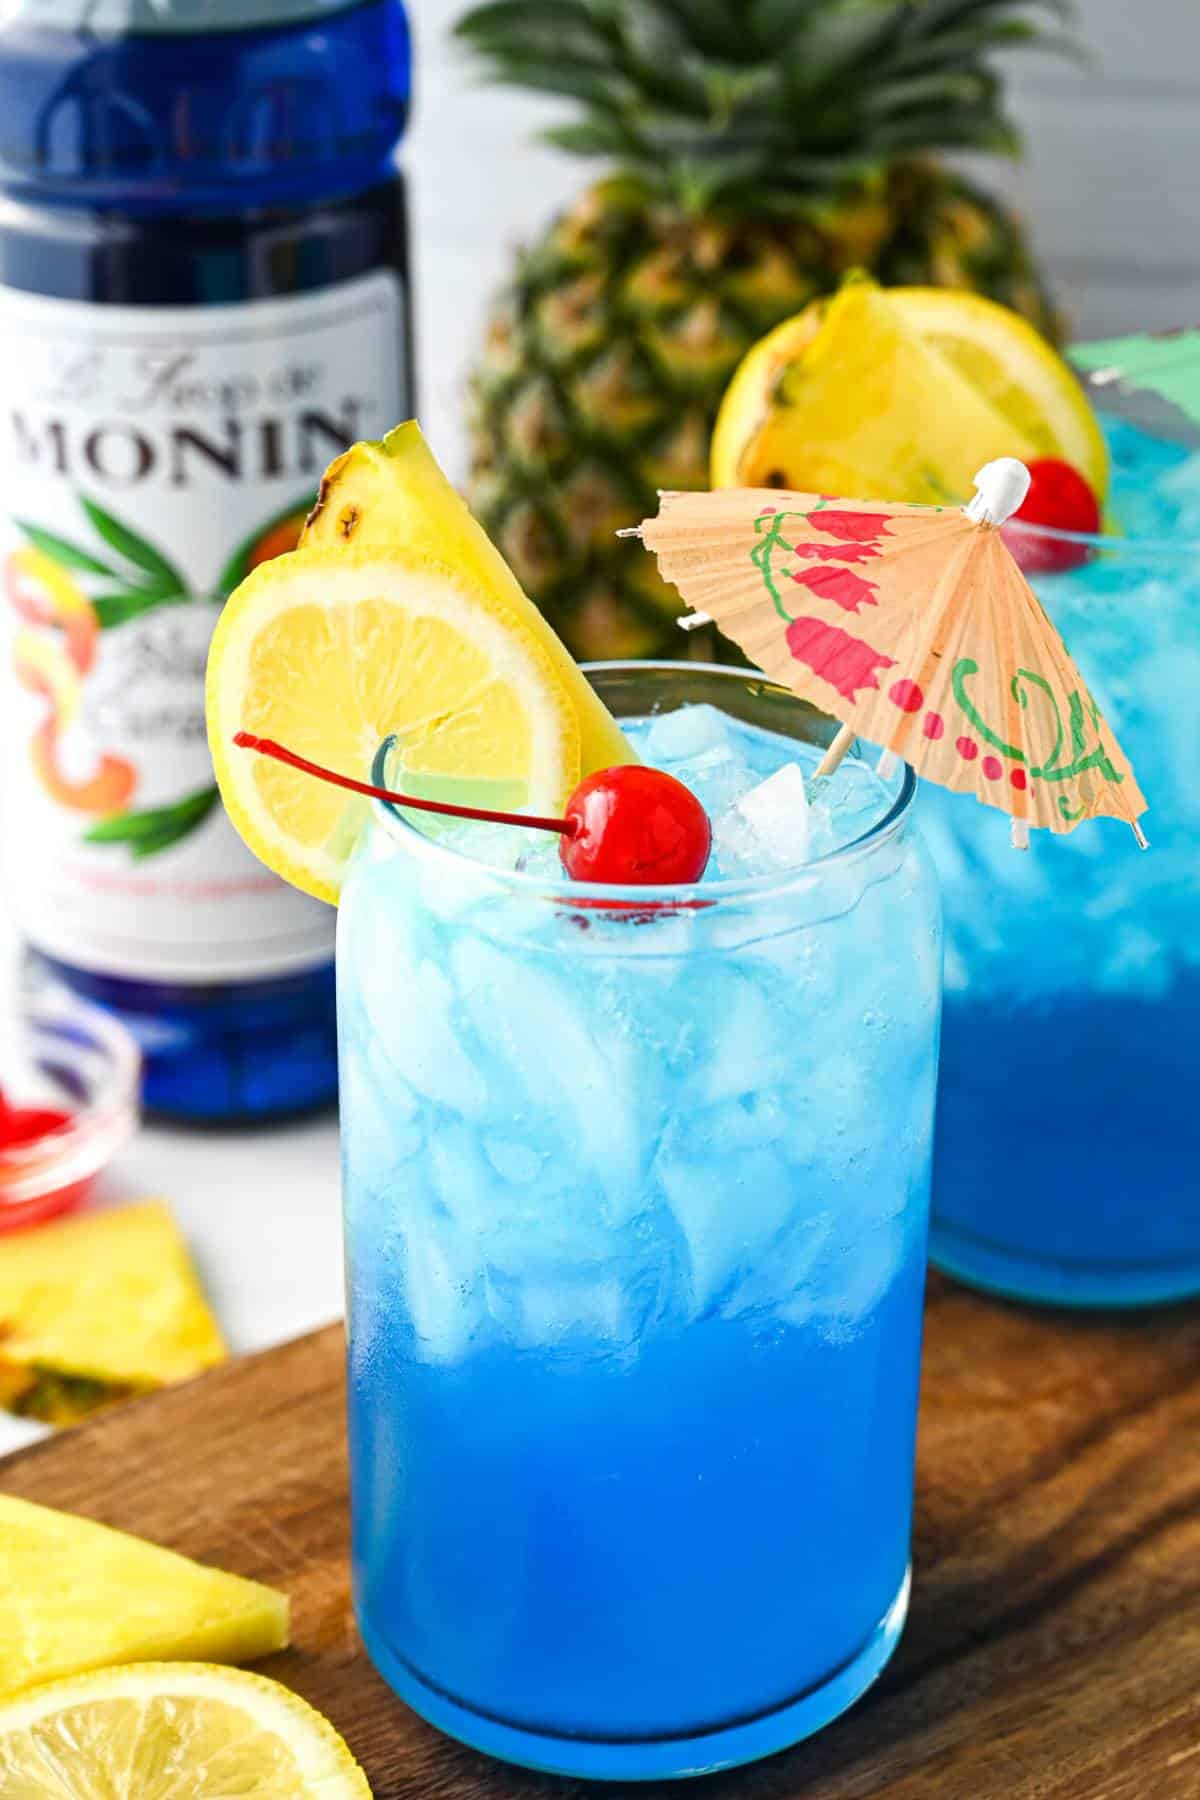 a bottle of monin blue curacao syrup behind a could of blue non-alcoholic drinks with fancy tropical garnishes